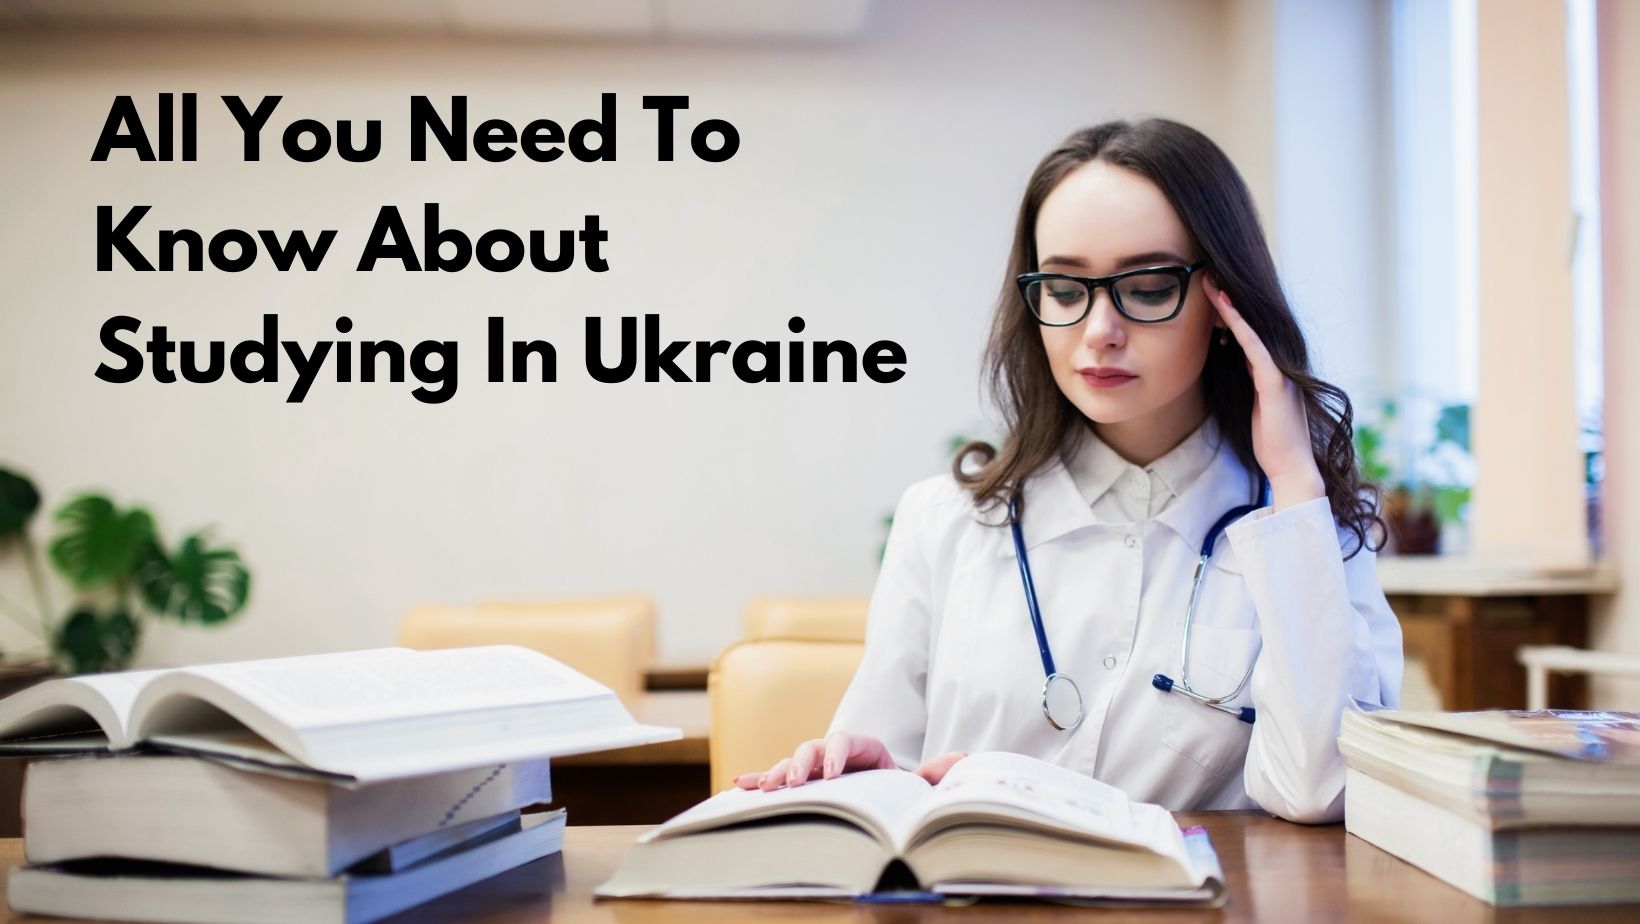 All You Need To Know About Studying In Ukraine